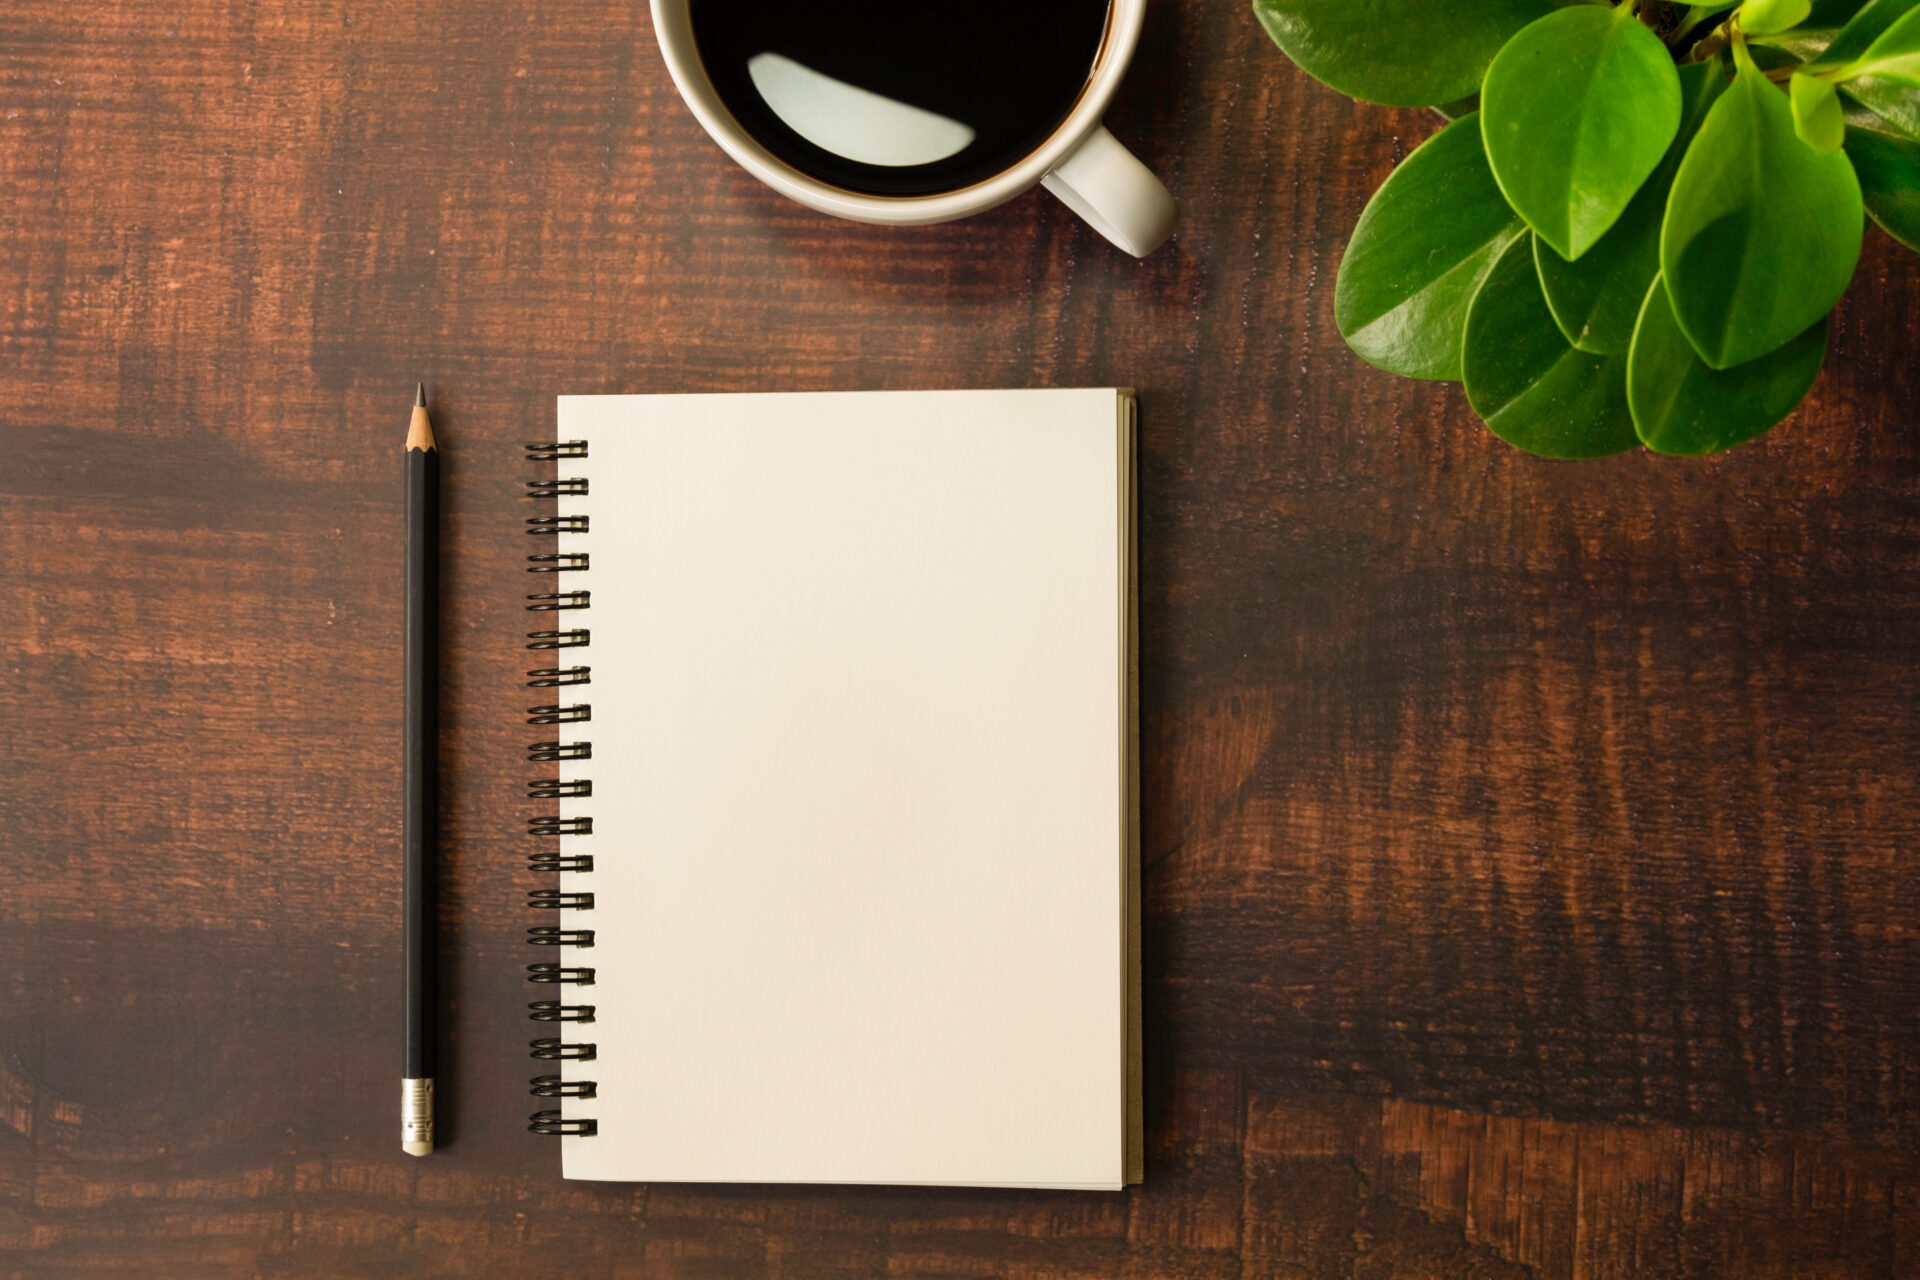 A notebook and pencil beside a plant and a mug of coffee on a wooden surface